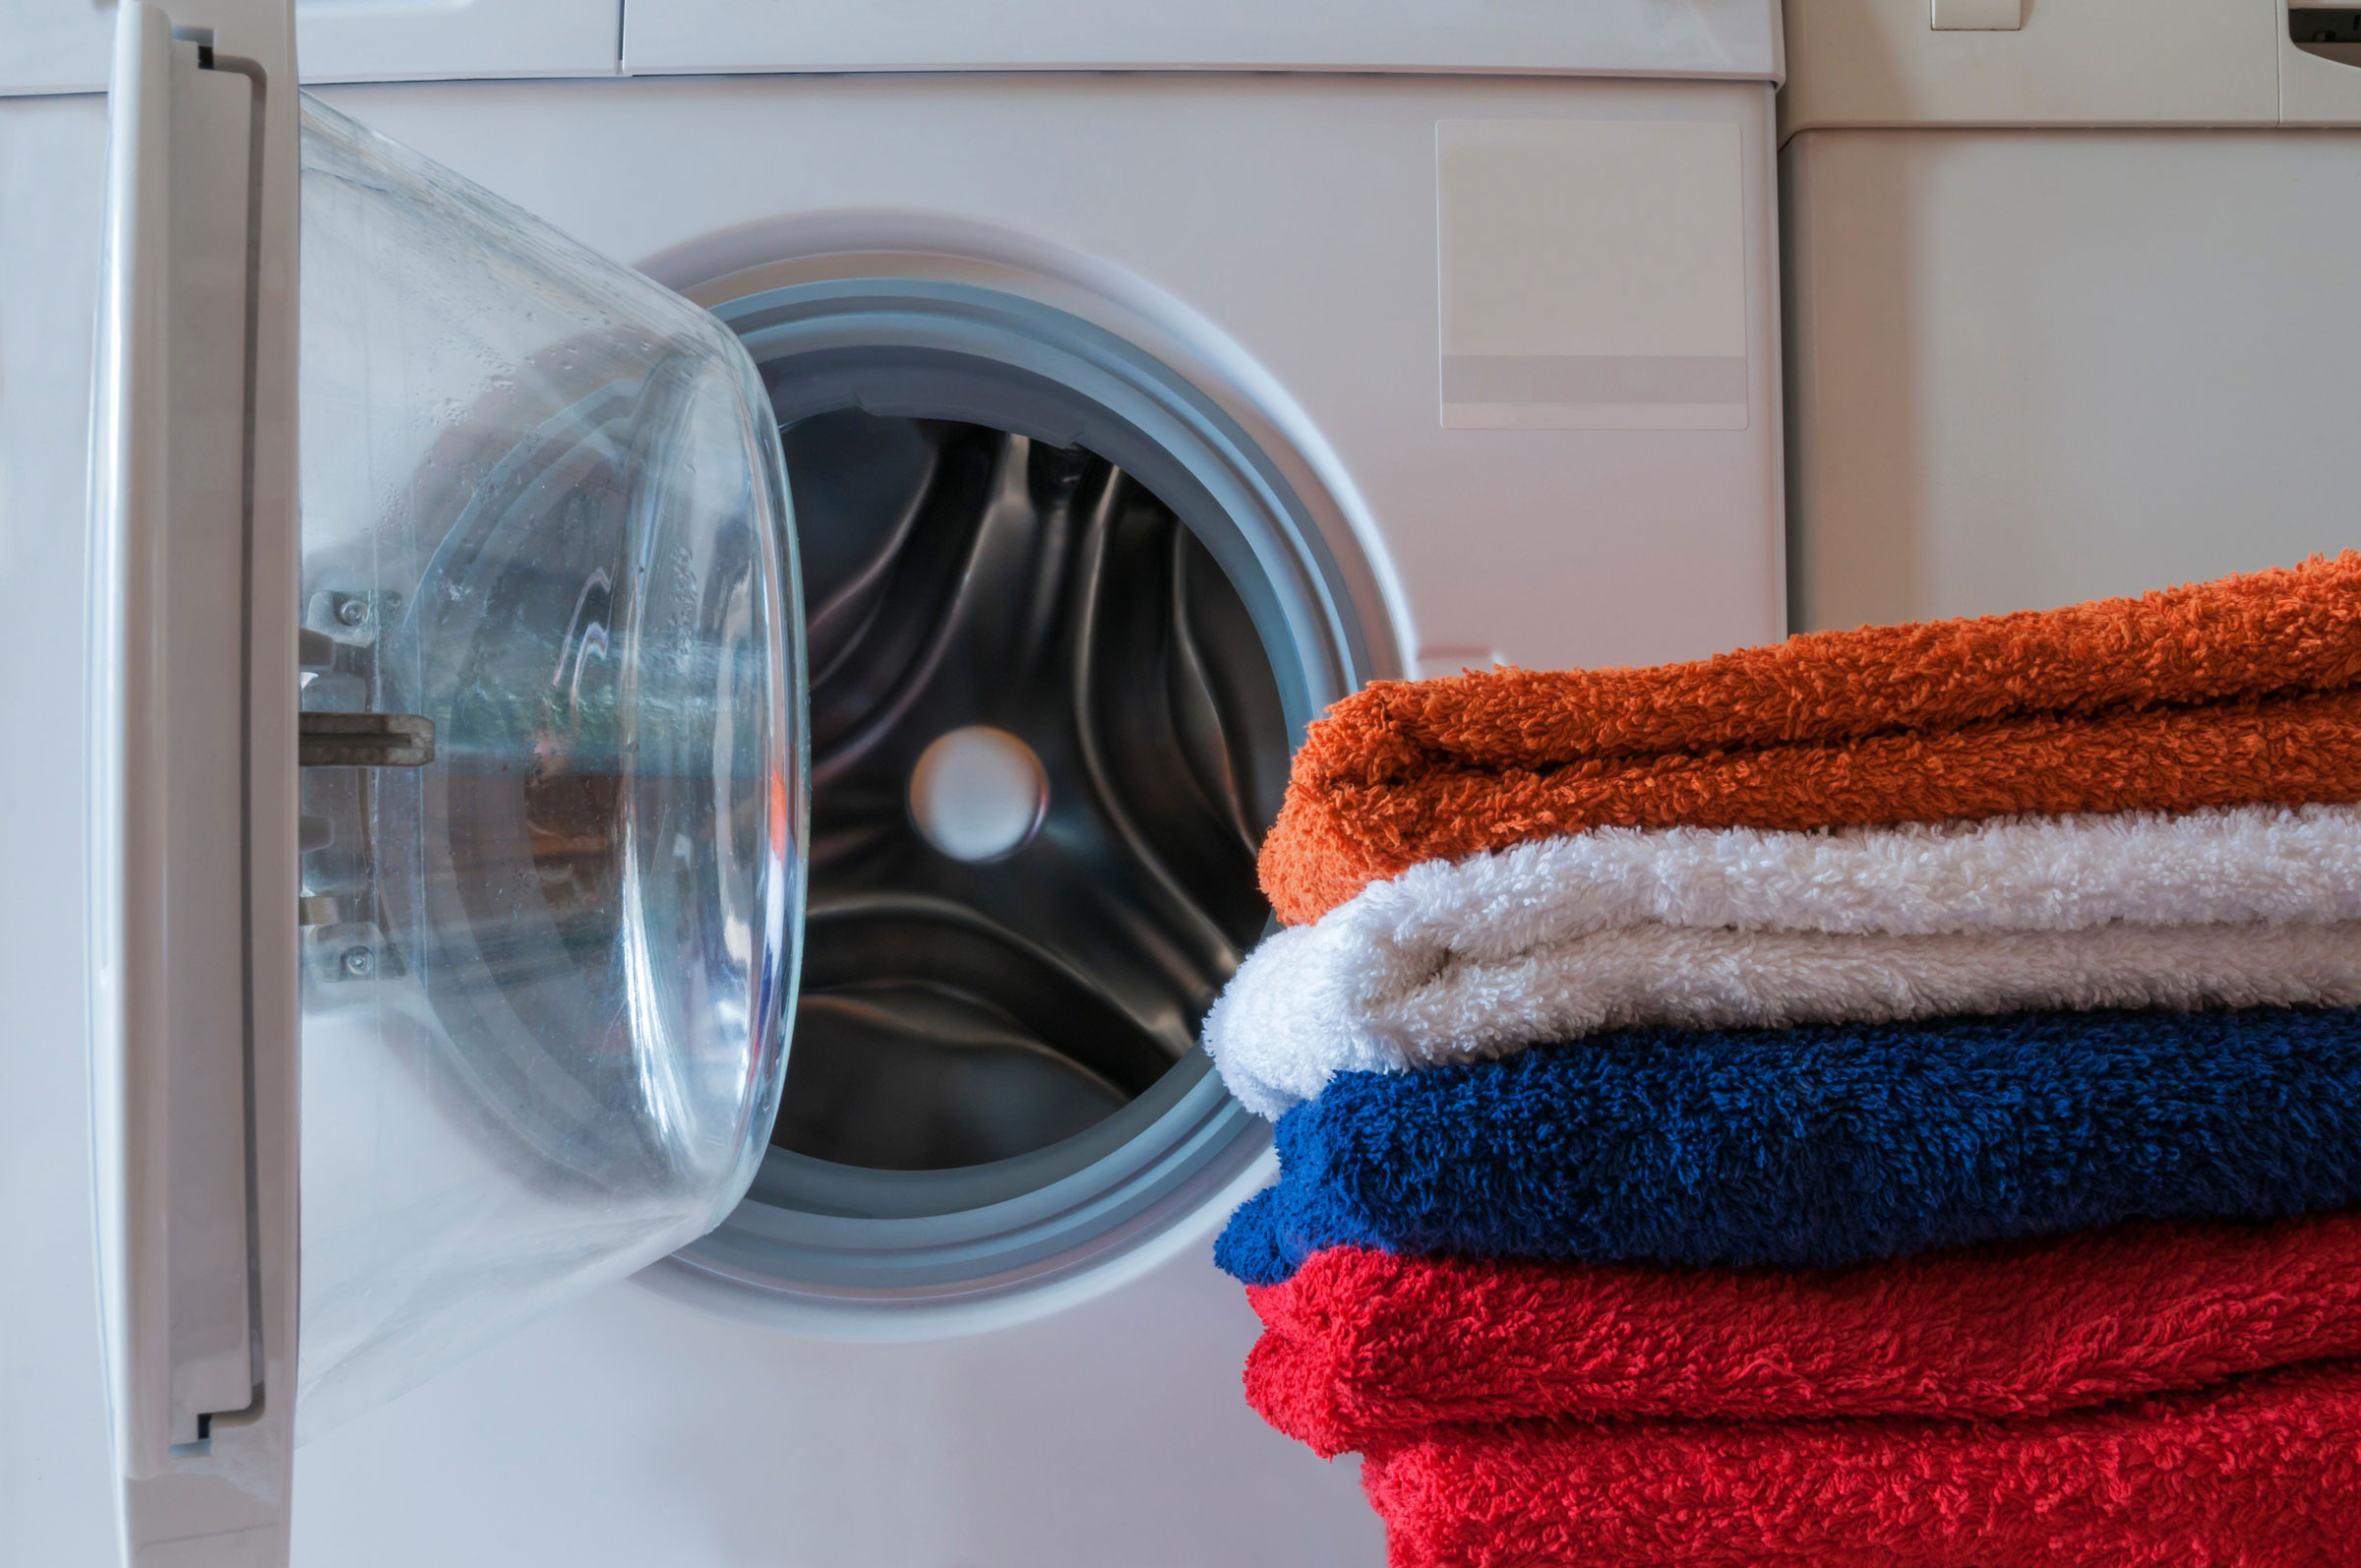 Bobs-Janitorial-Topeka-Dryer-Vent-Cleaning-Service